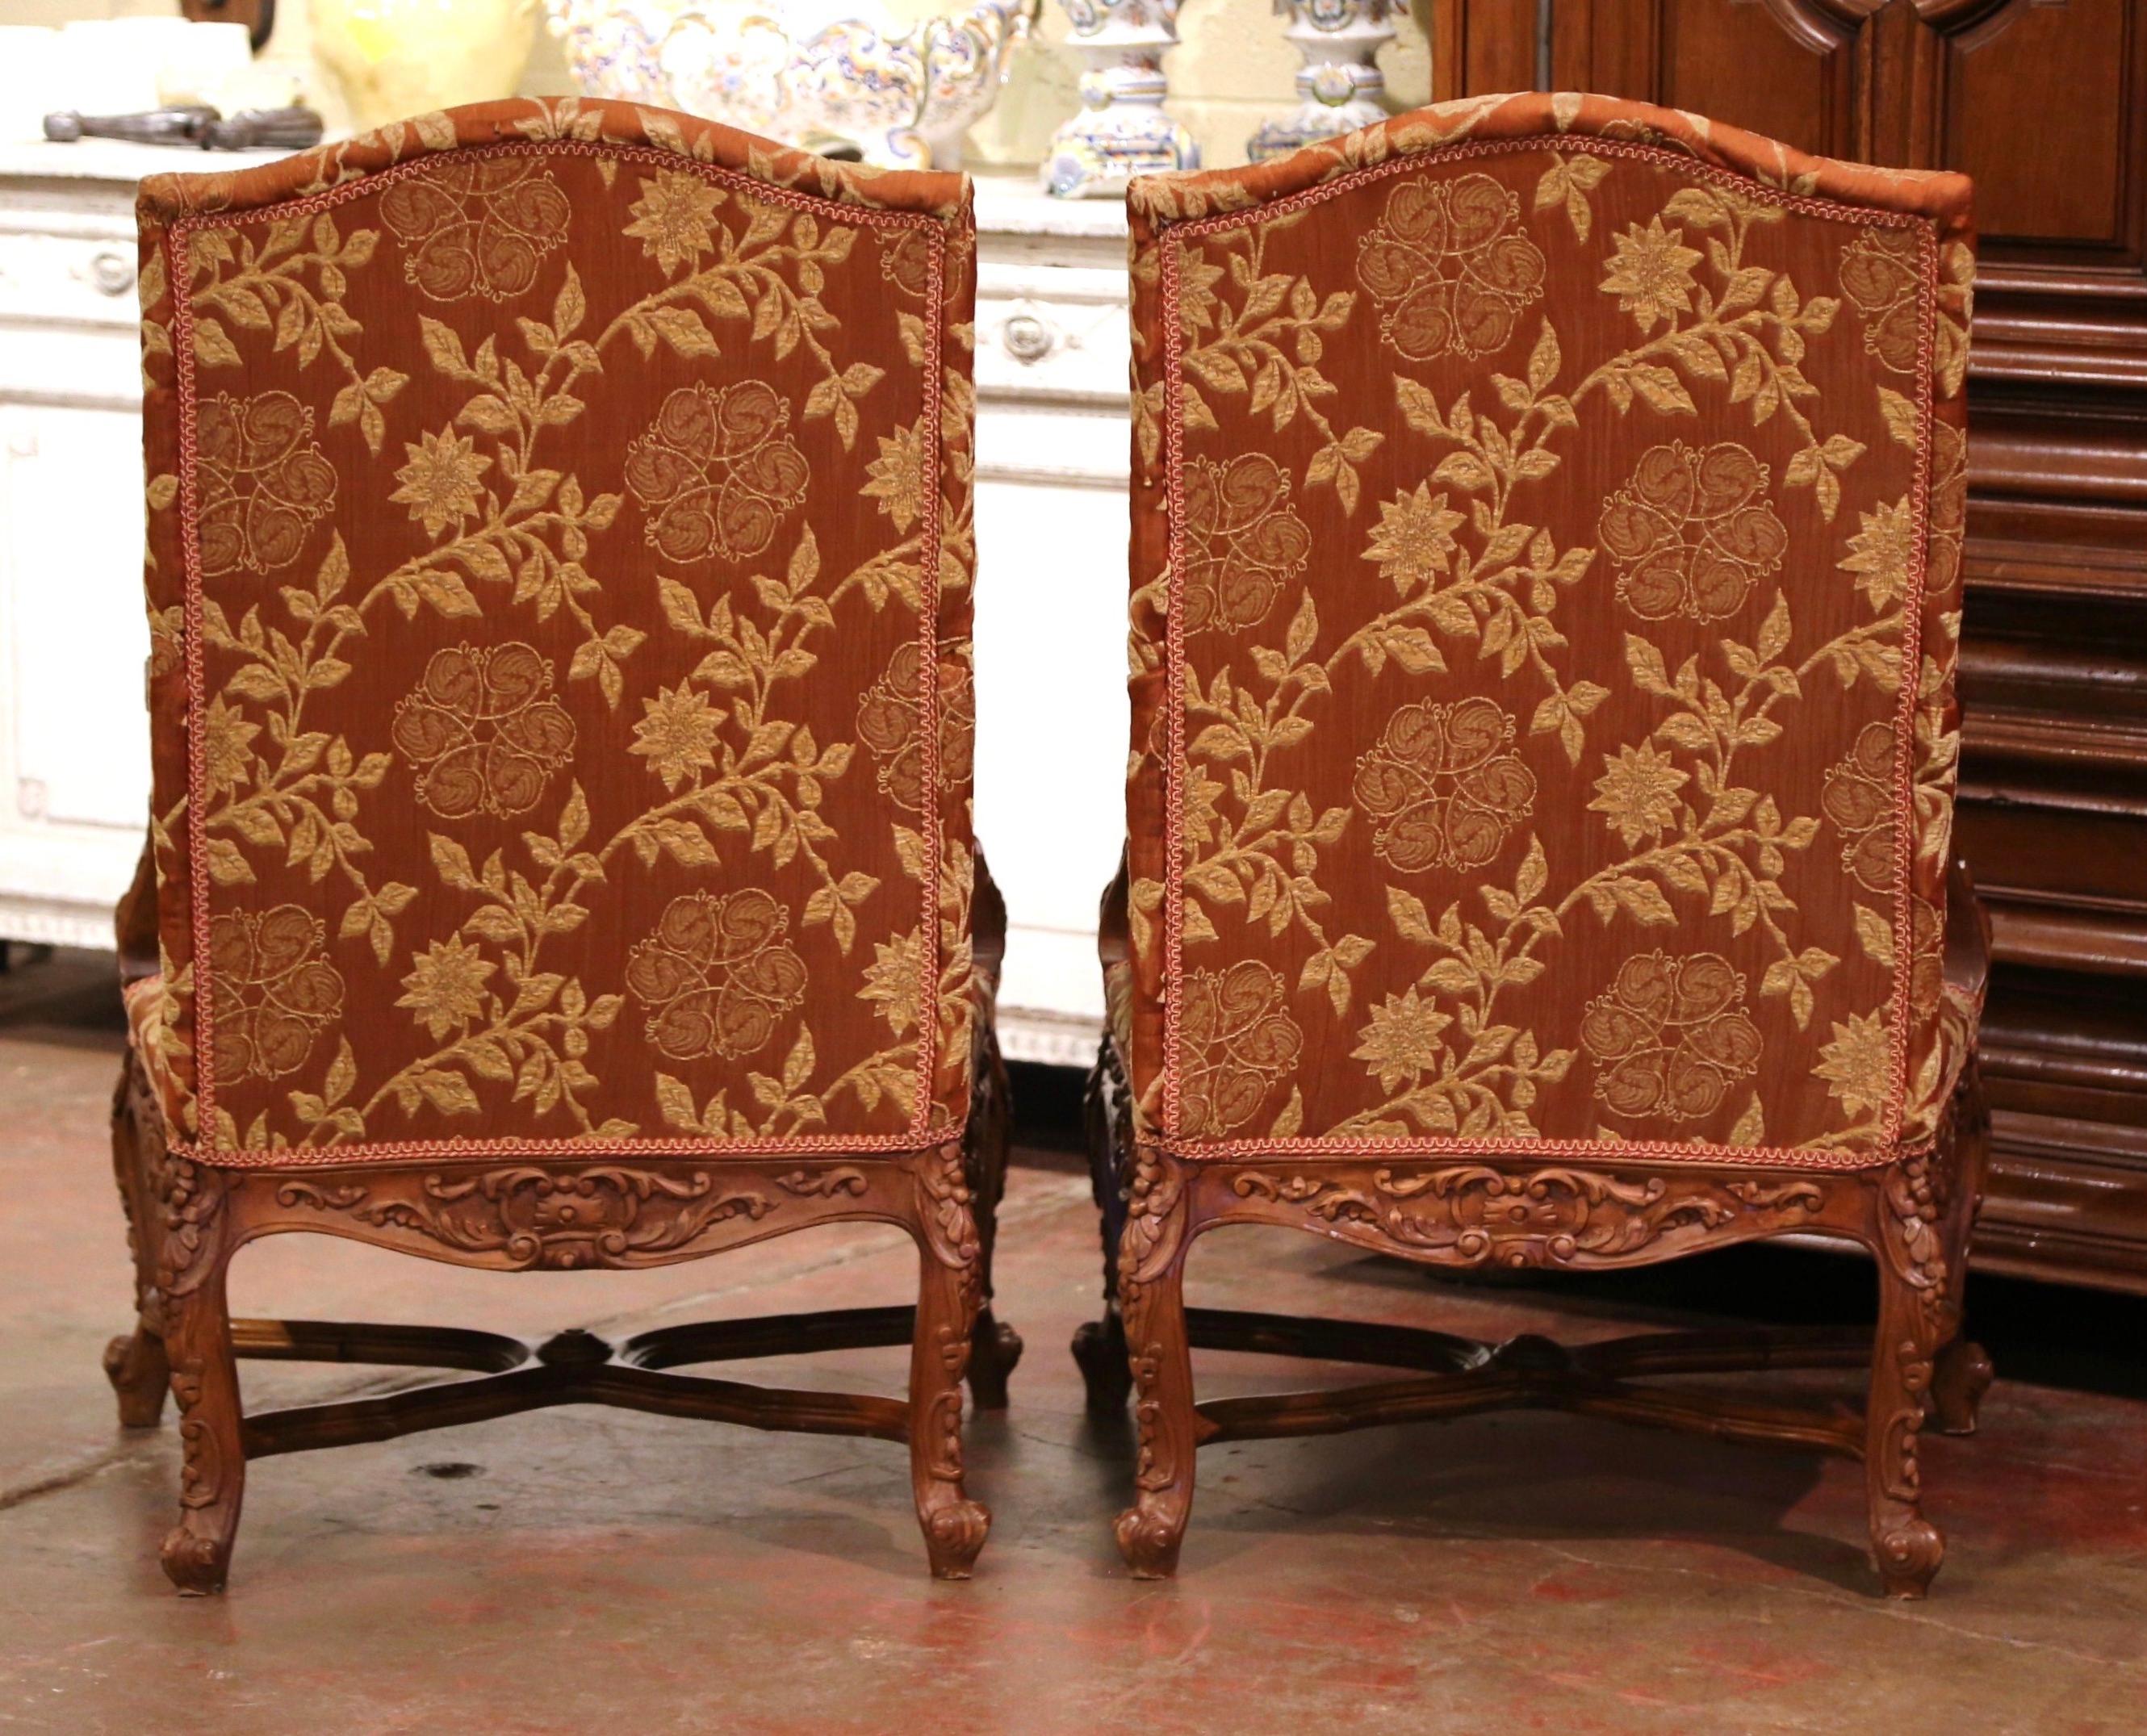 Pair of 19th Century Louis XV Carved Walnut Armchairs from Provence In Excellent Condition For Sale In Dallas, TX